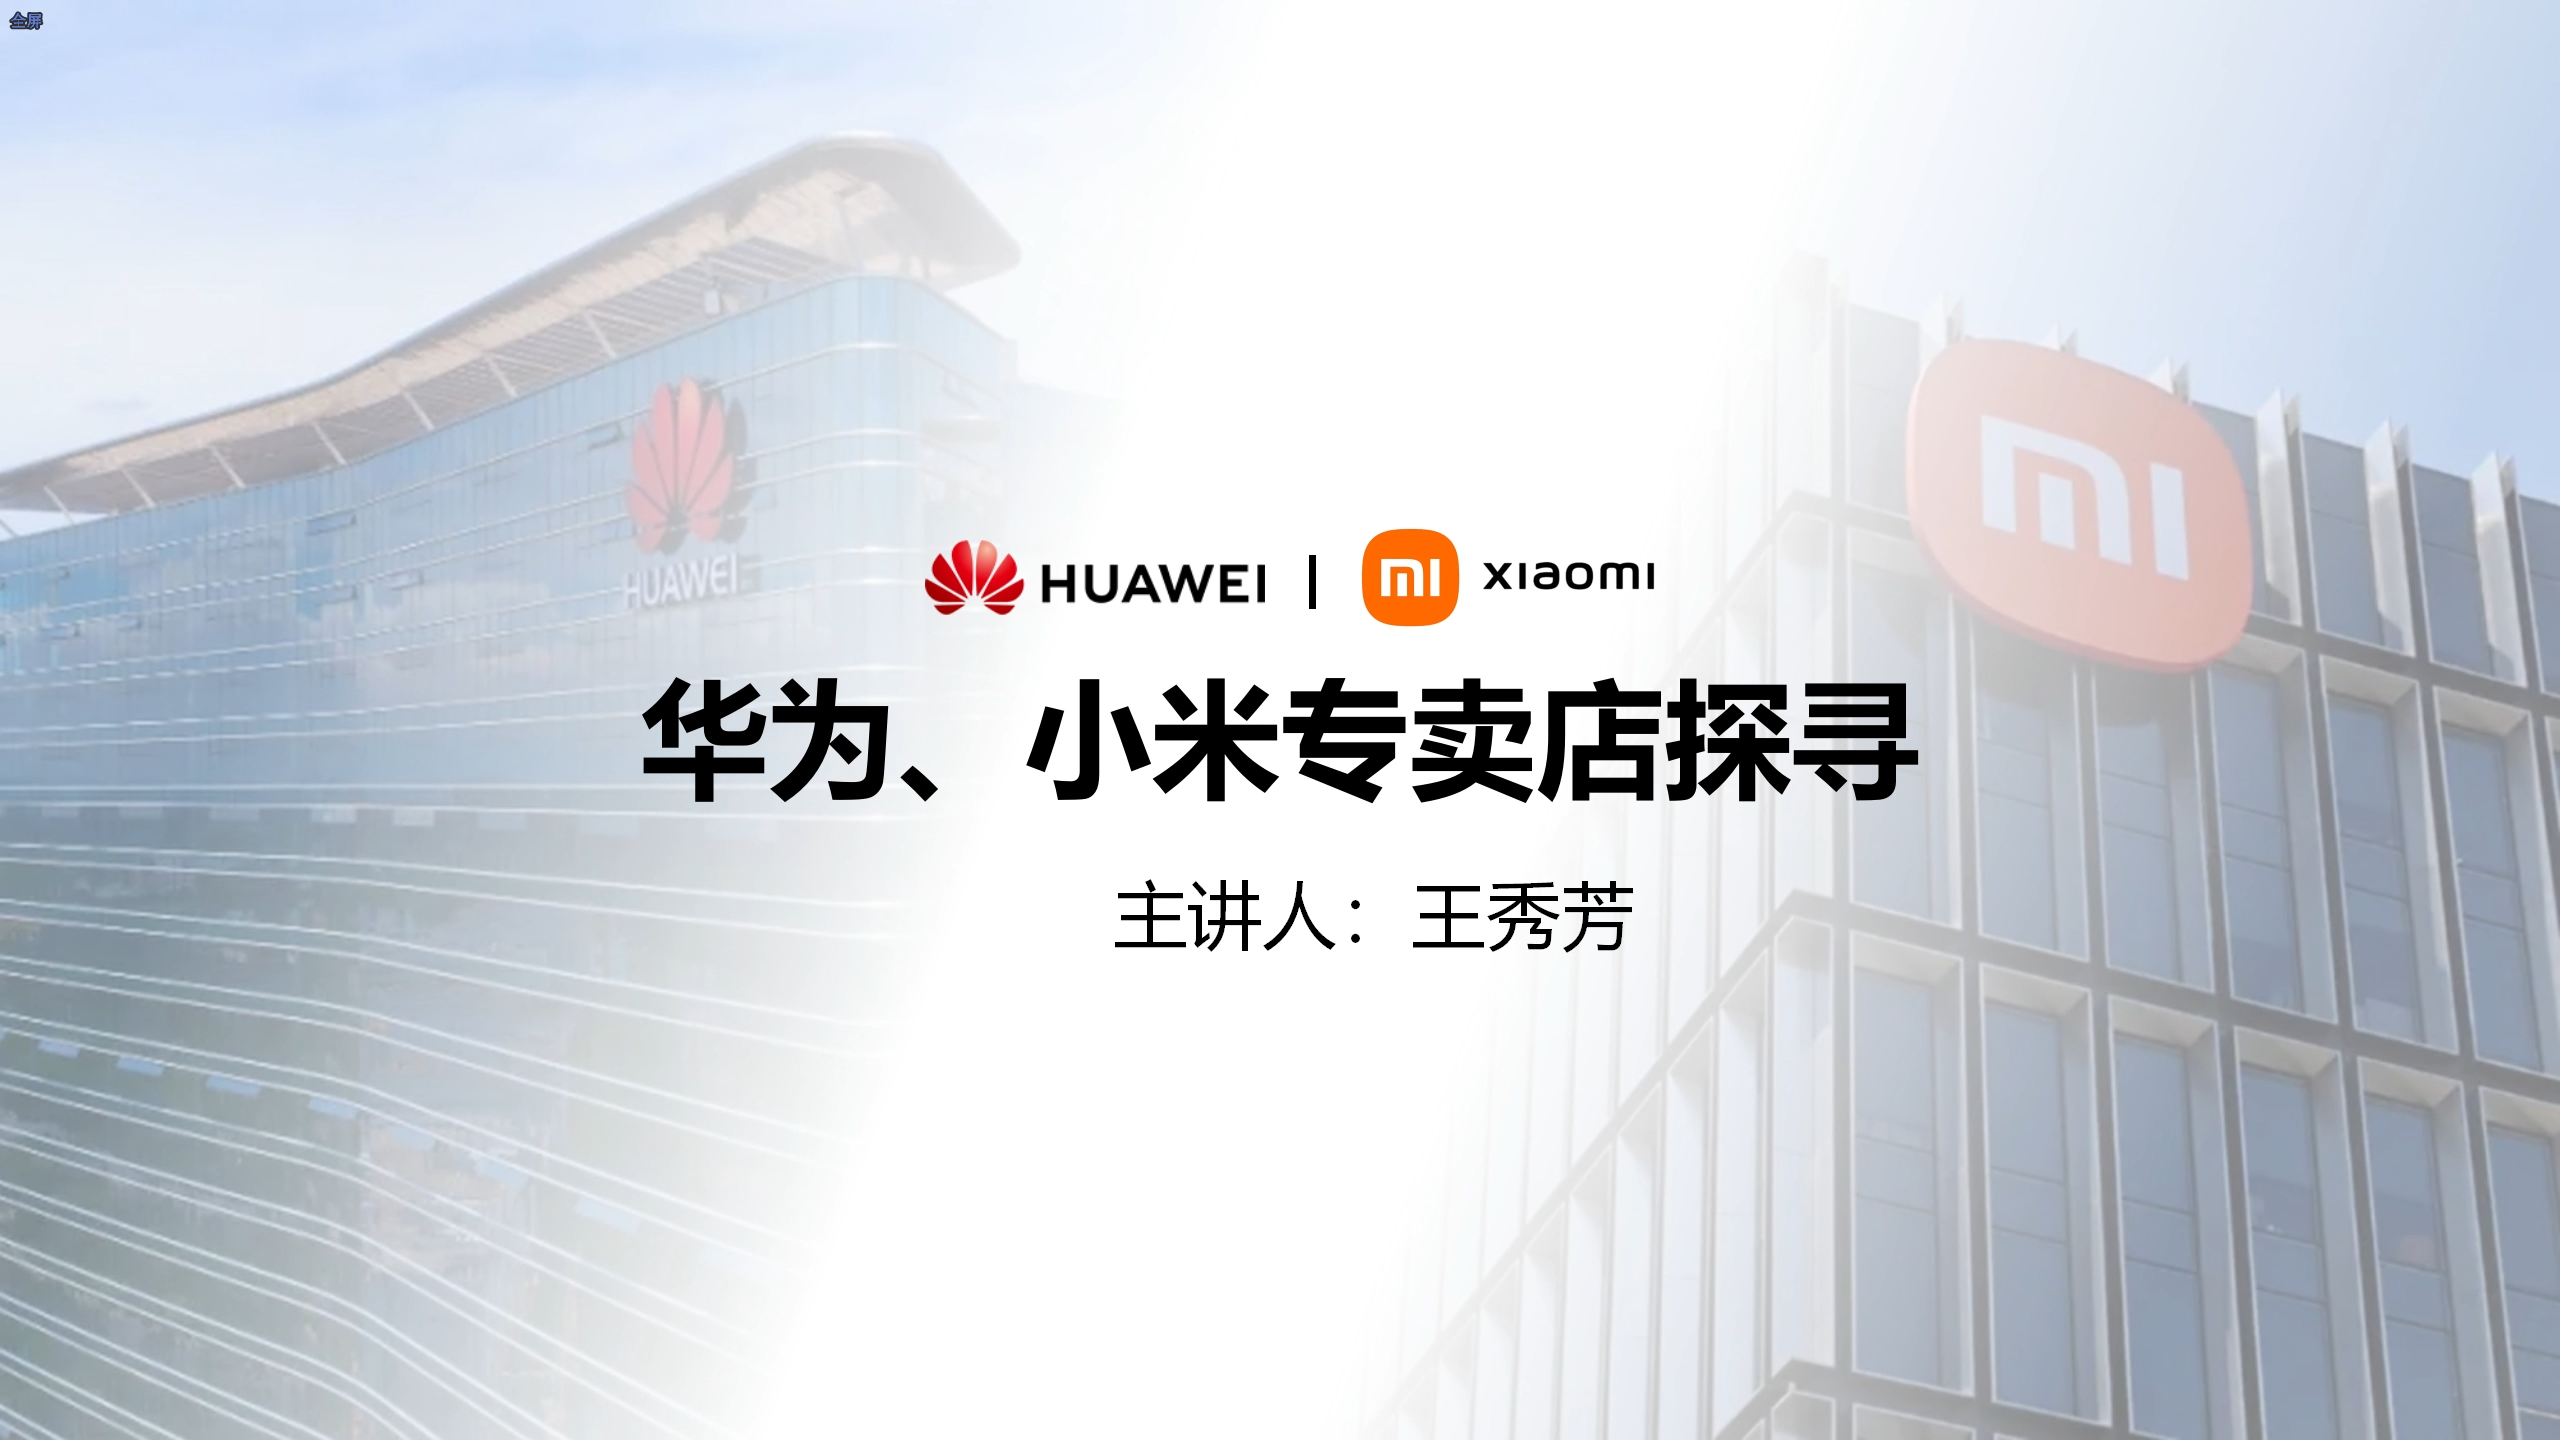 Visit to Huawei and Xiaomi stores